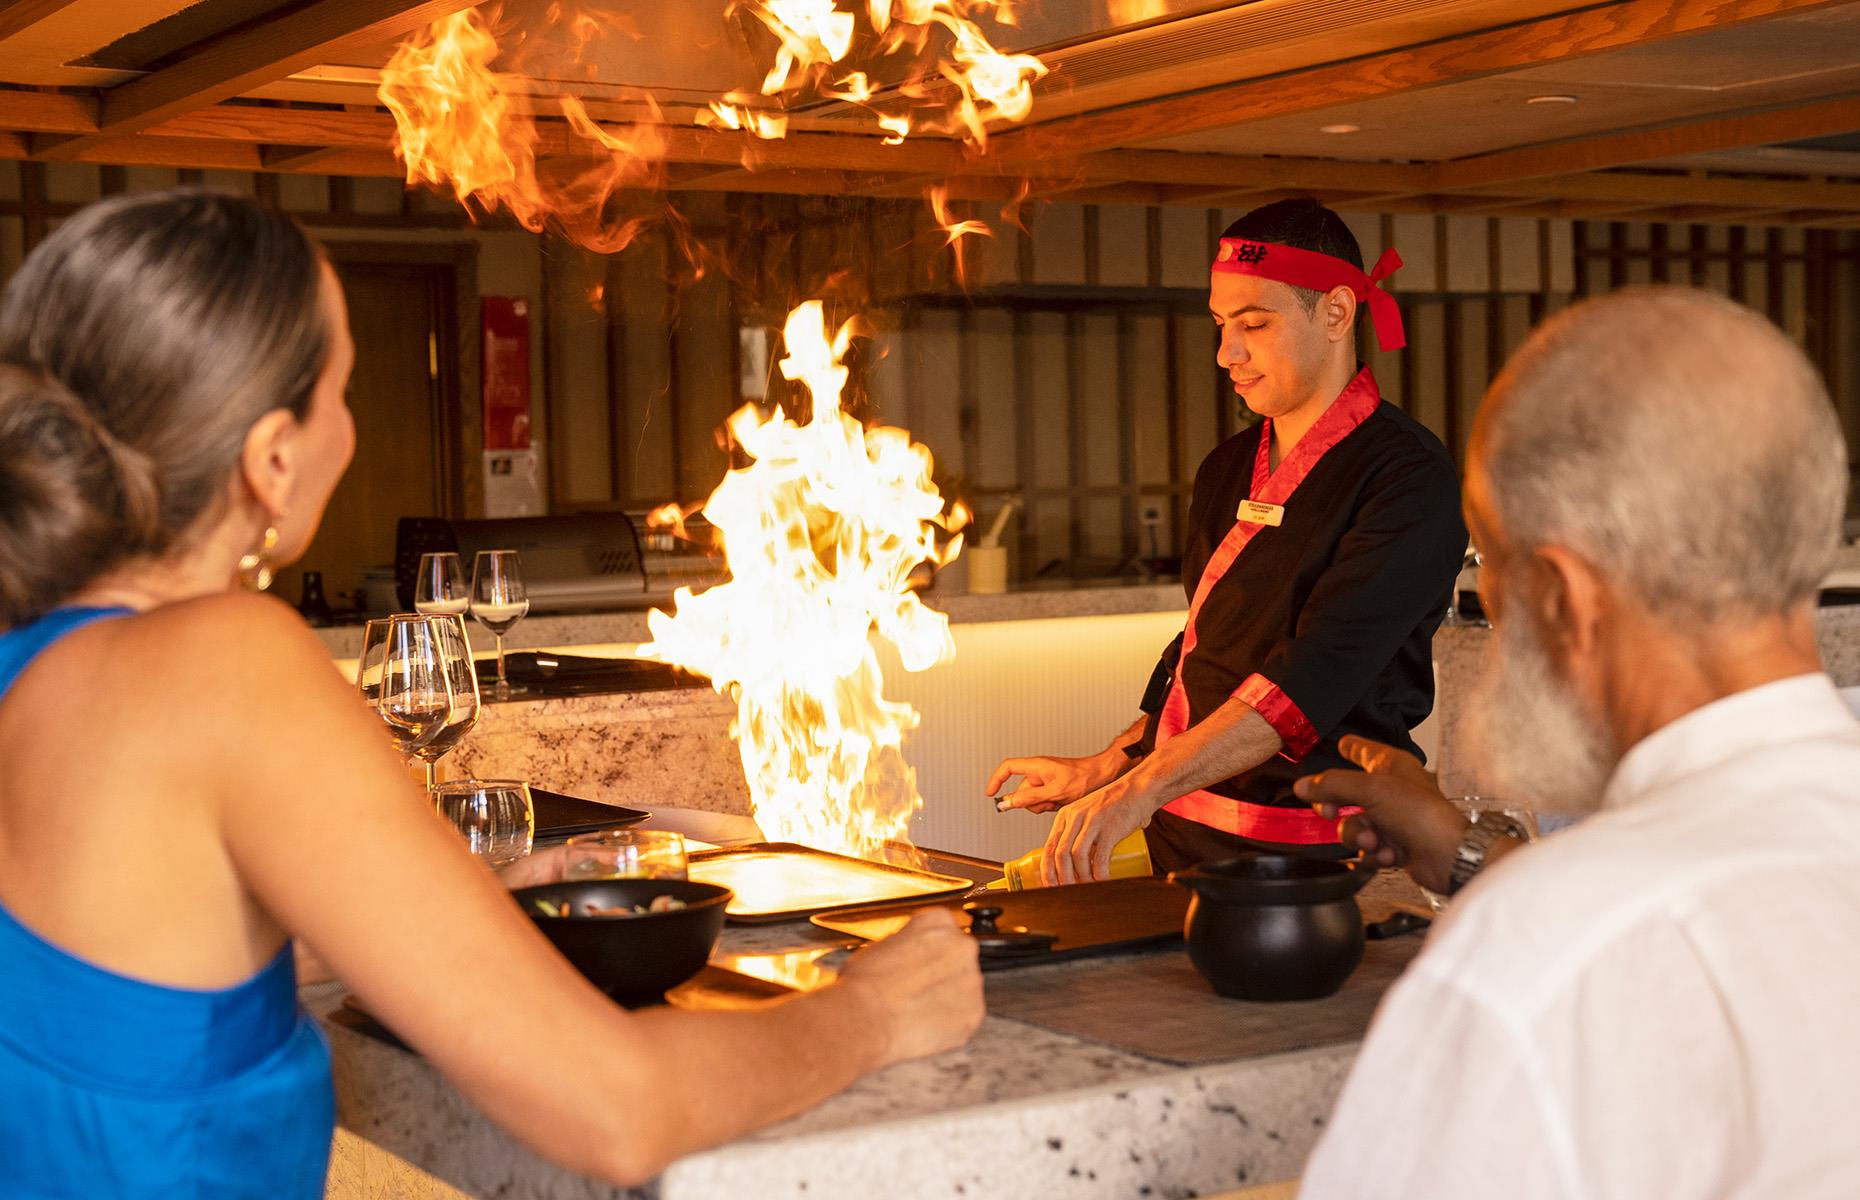 <p>Steigenberger boasts El Gouna’s only teppanyaki restaurant – and it’s well worth booking a table even if you’re staying elsewhere (it’s also included in the Dine Around package). Harumaki’s best seats are around the teppanyaki grill or hot plate, where the chef performs a fiery show complete with lightning-speed chopping, supreme egg-catching skills and some dramatic flambeing. The menu includes salad, soup, a choice of beef tenderloin, seafood, vegetables and chicken, and seasonal fruit flambe with ice cream.</p>